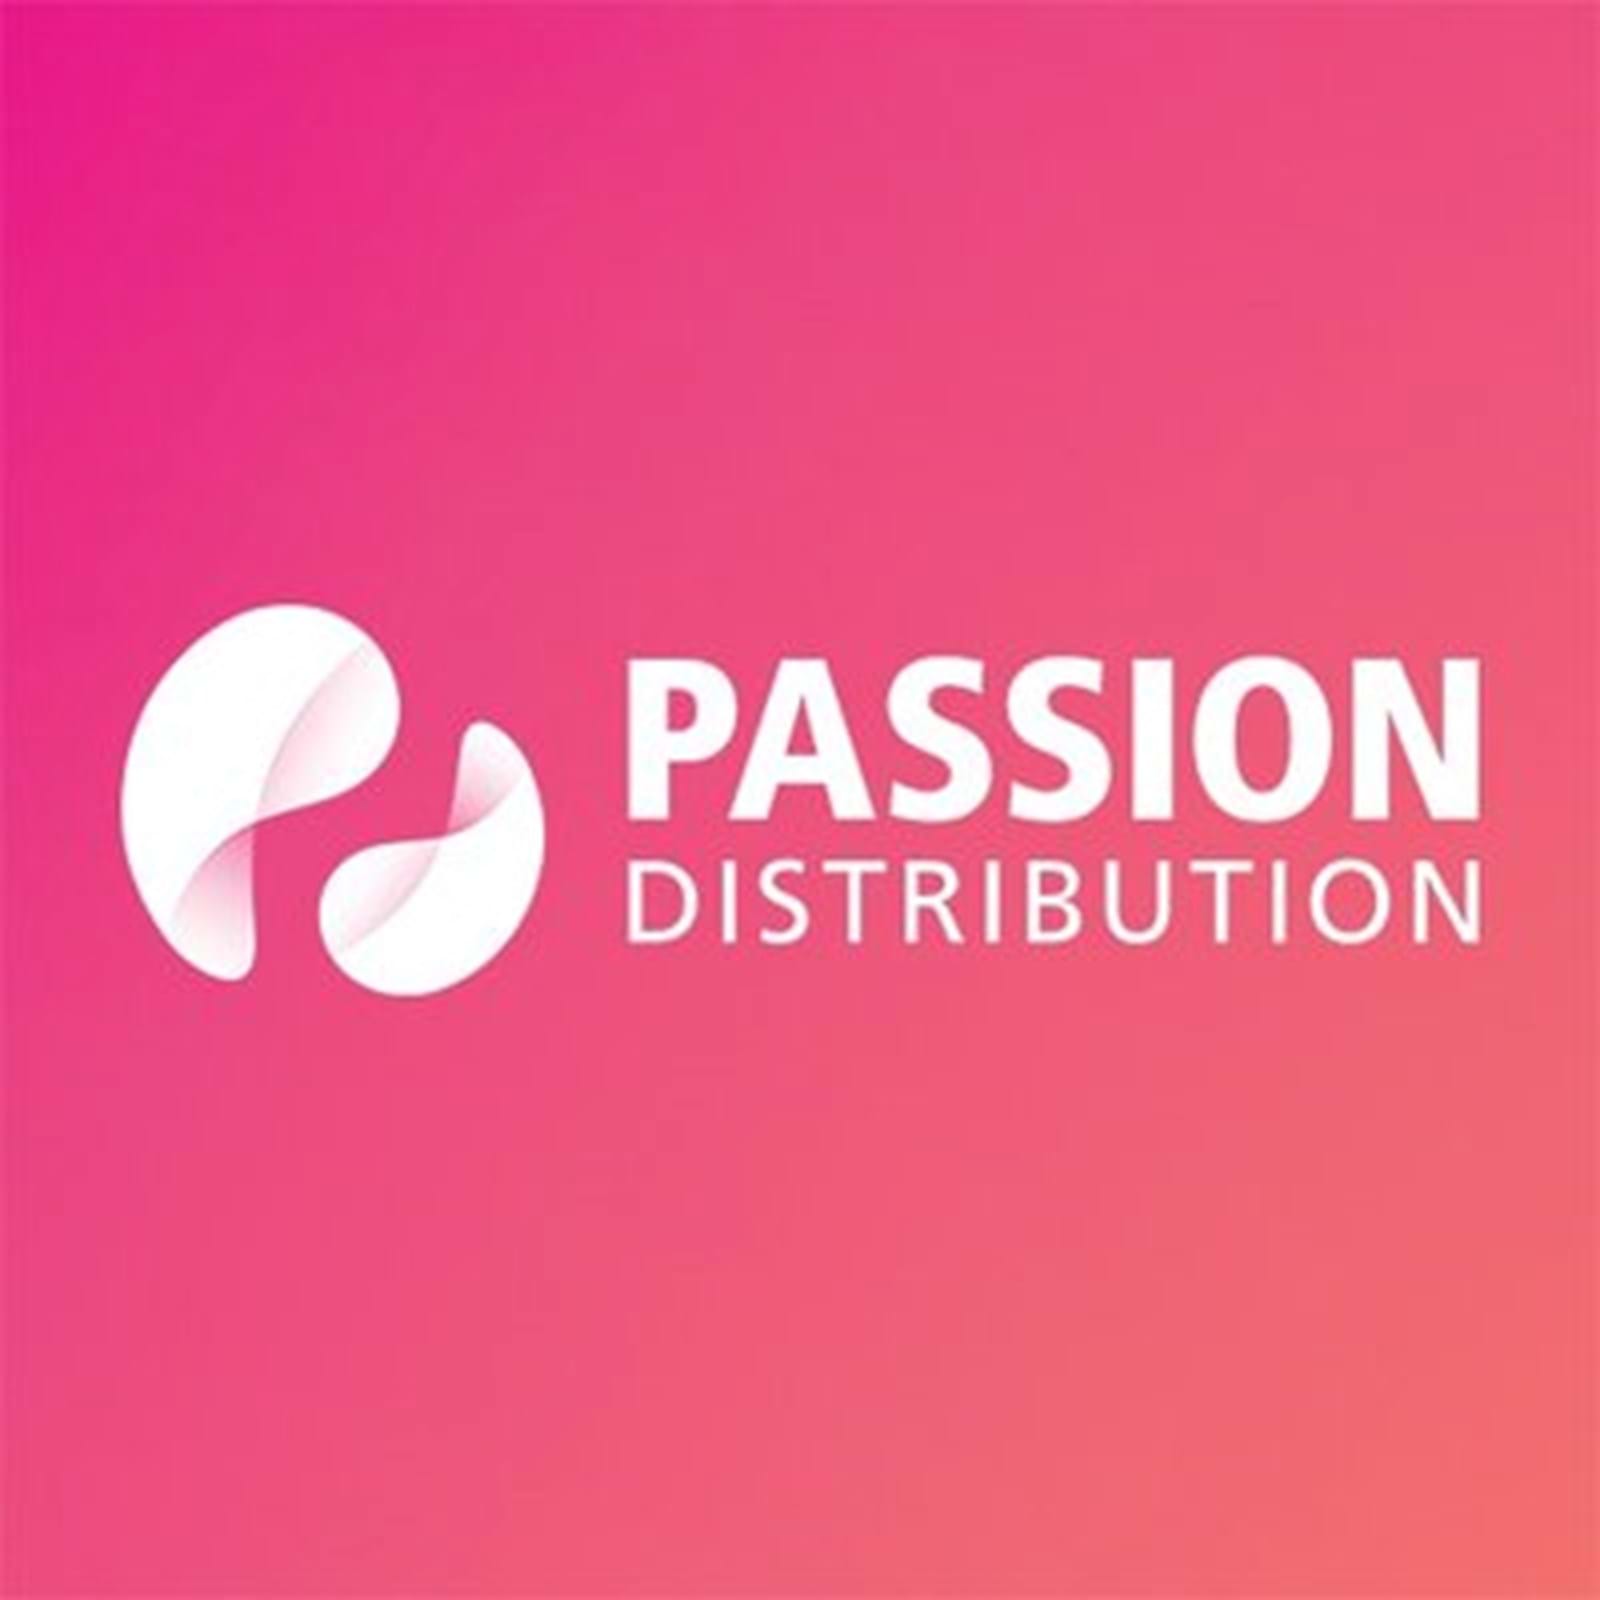 Passion Distribution Announces Producers Programming Brief Initiative